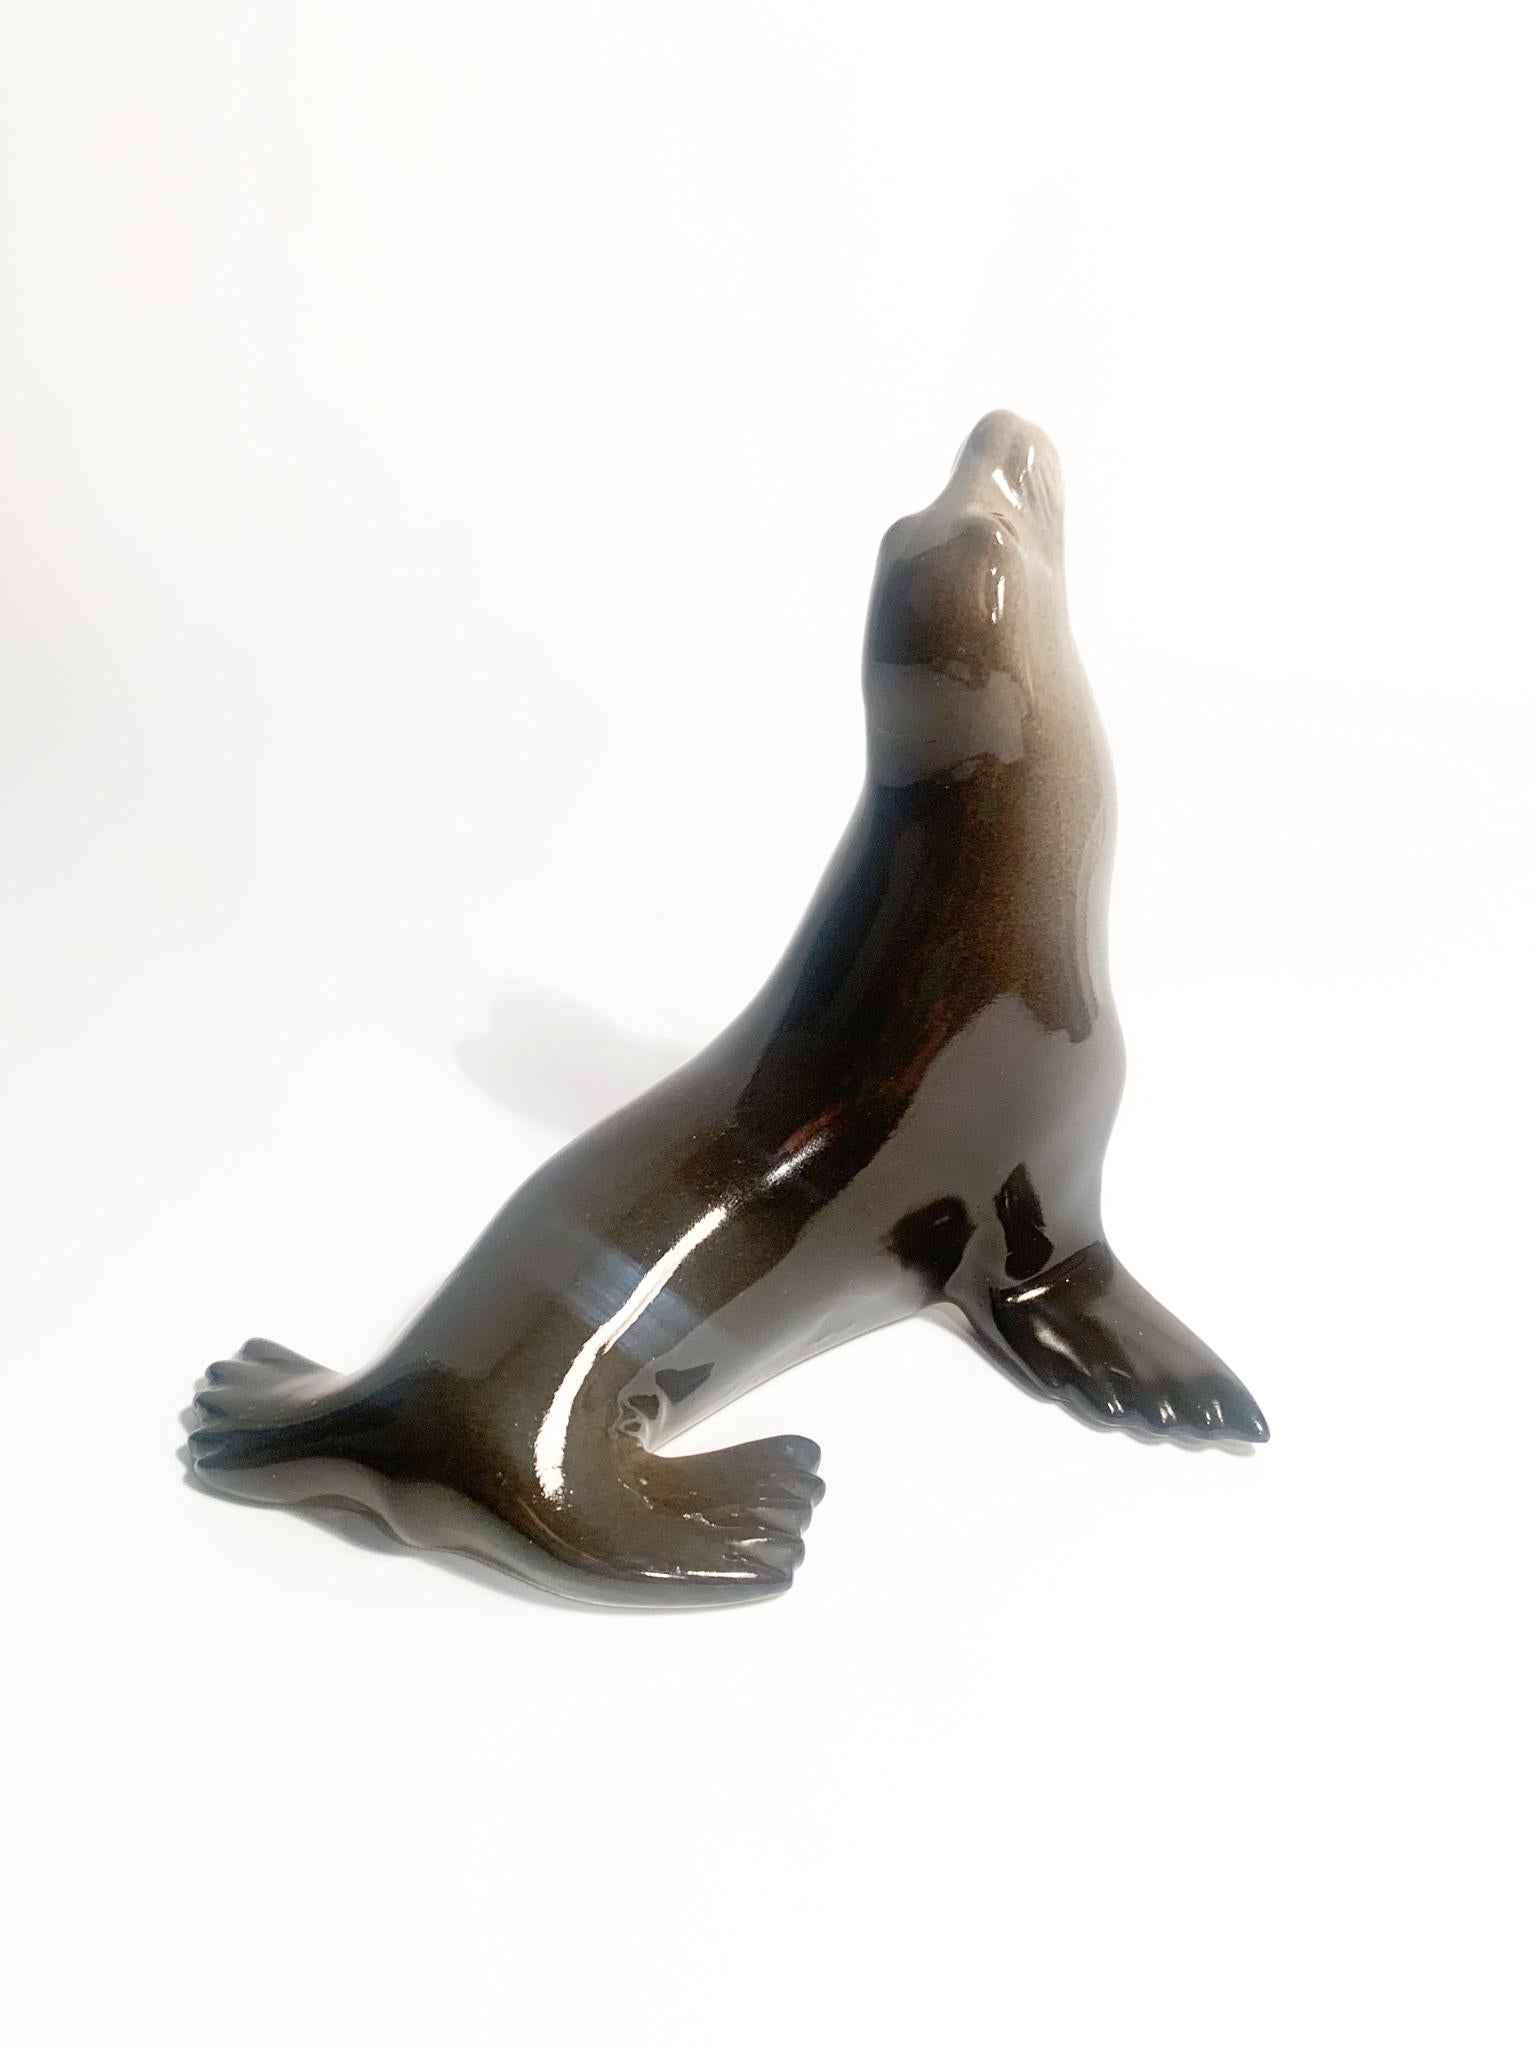 URSS Ceramic Sculpture of a Seal from the 1940s For Sale 2